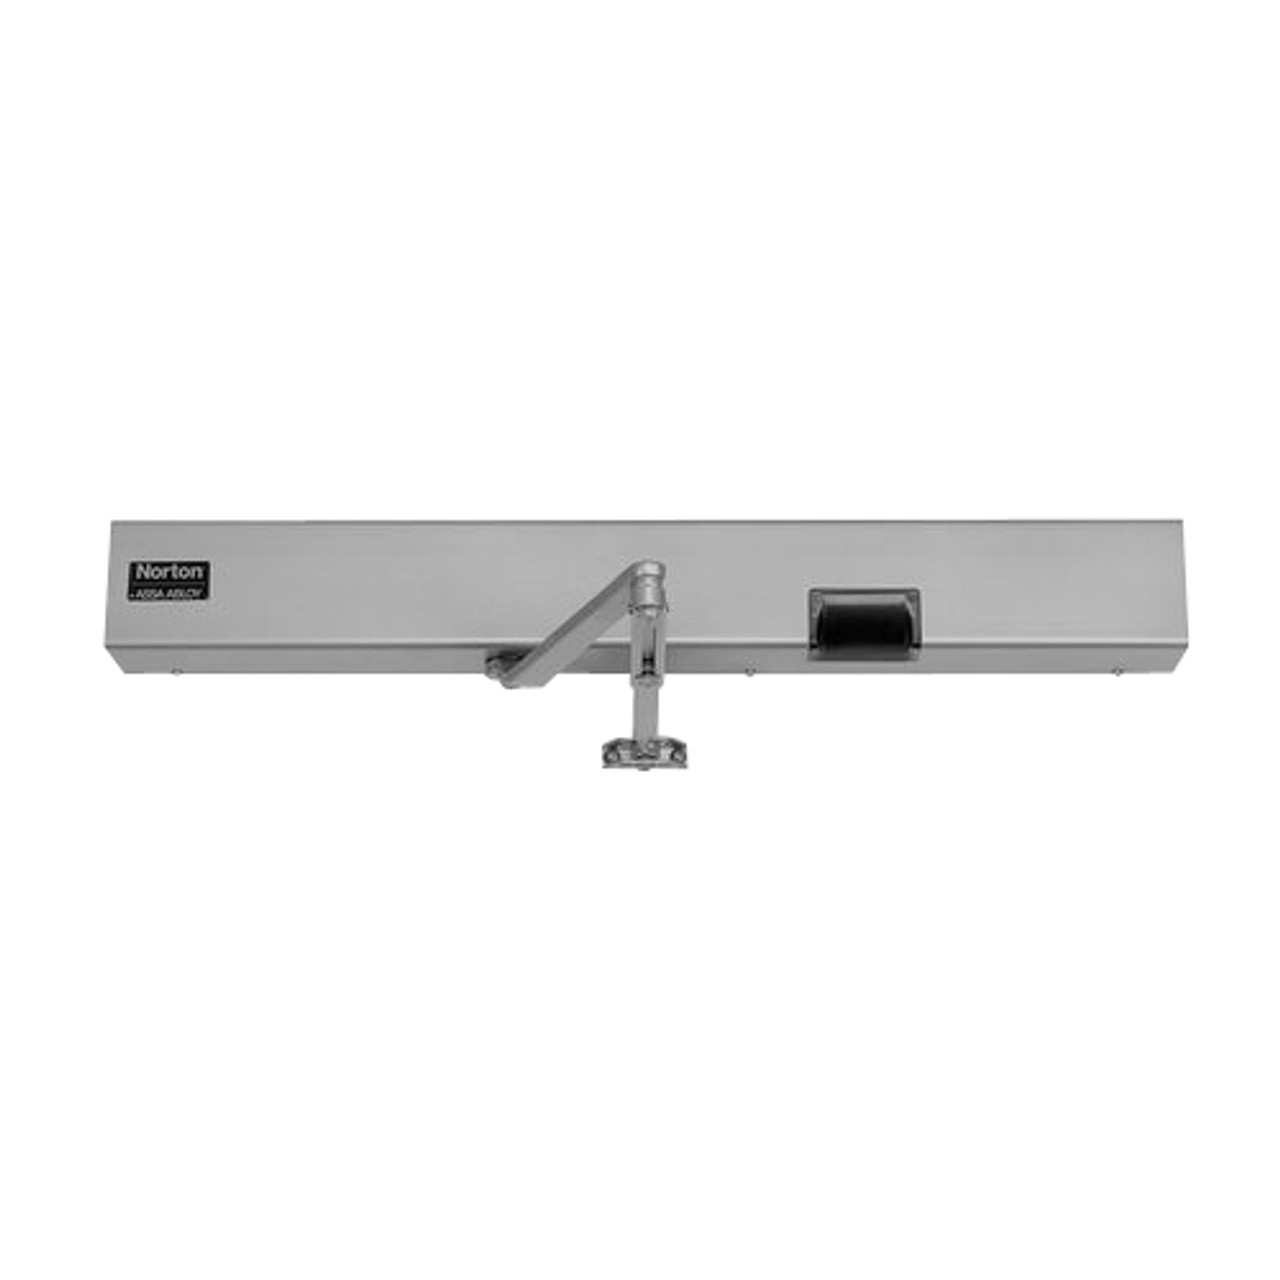 7134SZ-DZ-RH-120VAC-689 Norton 7100SZ Series Safe Zone Multi-Point Closer/Holder with Motion Sensor and Push Side Double Lever 13-1/2 inch Main Arm in Aluminum Finish